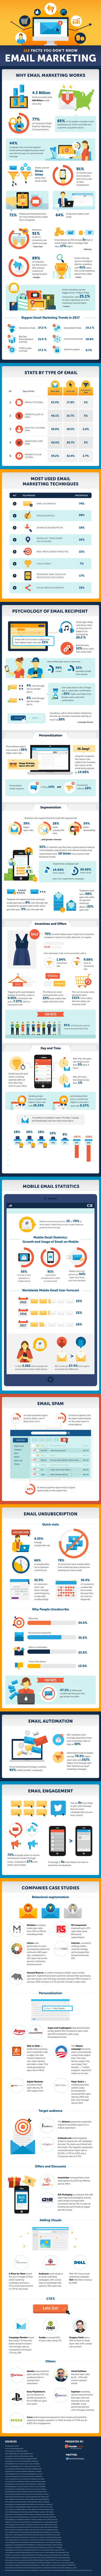 infographic for email marketing 